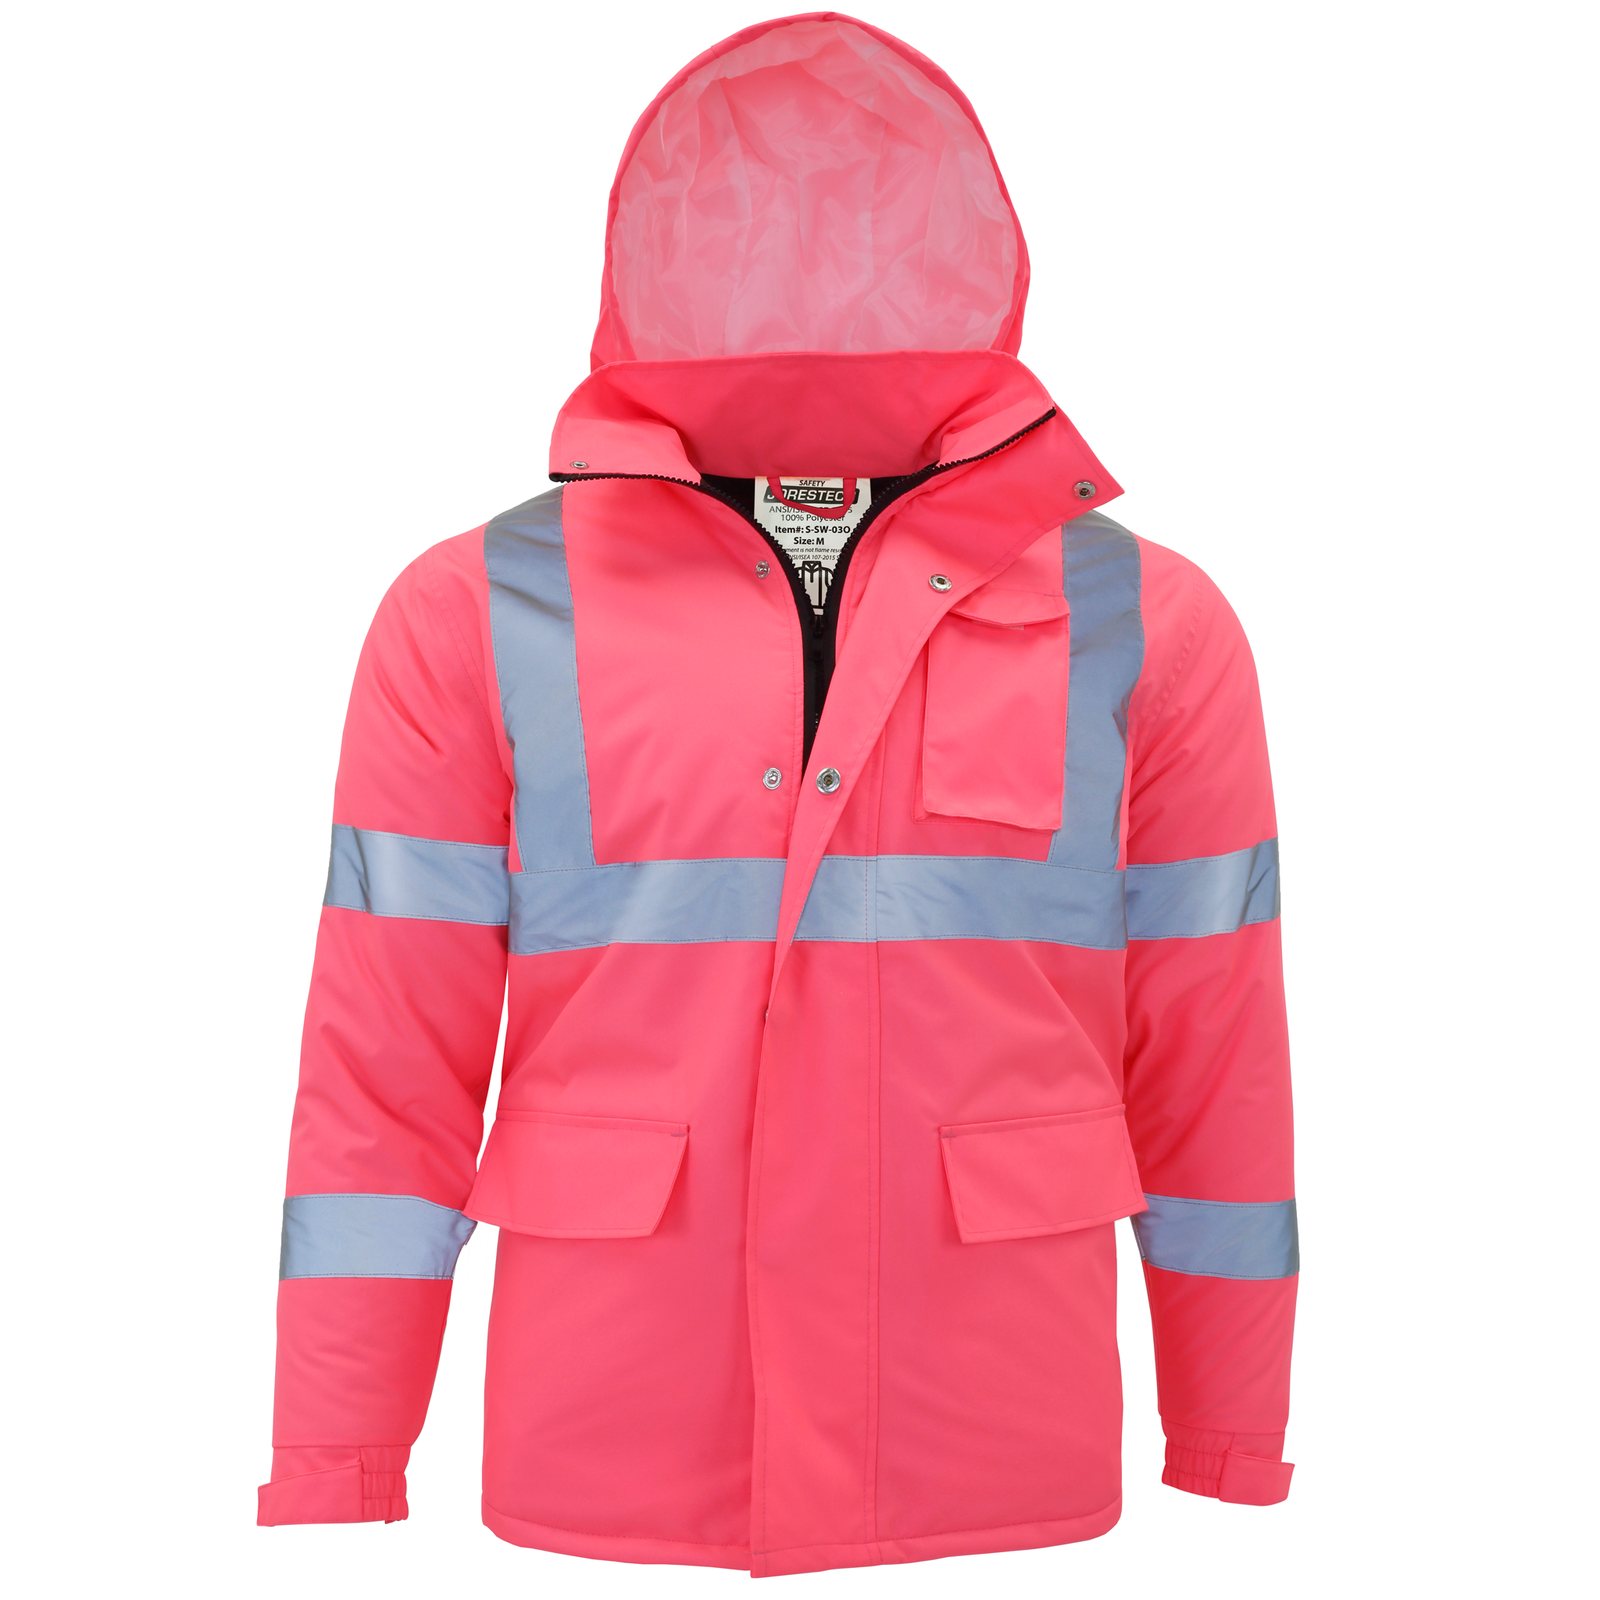 Jorestech hi vis waterproof safety jacket with reflective strips and hoodie